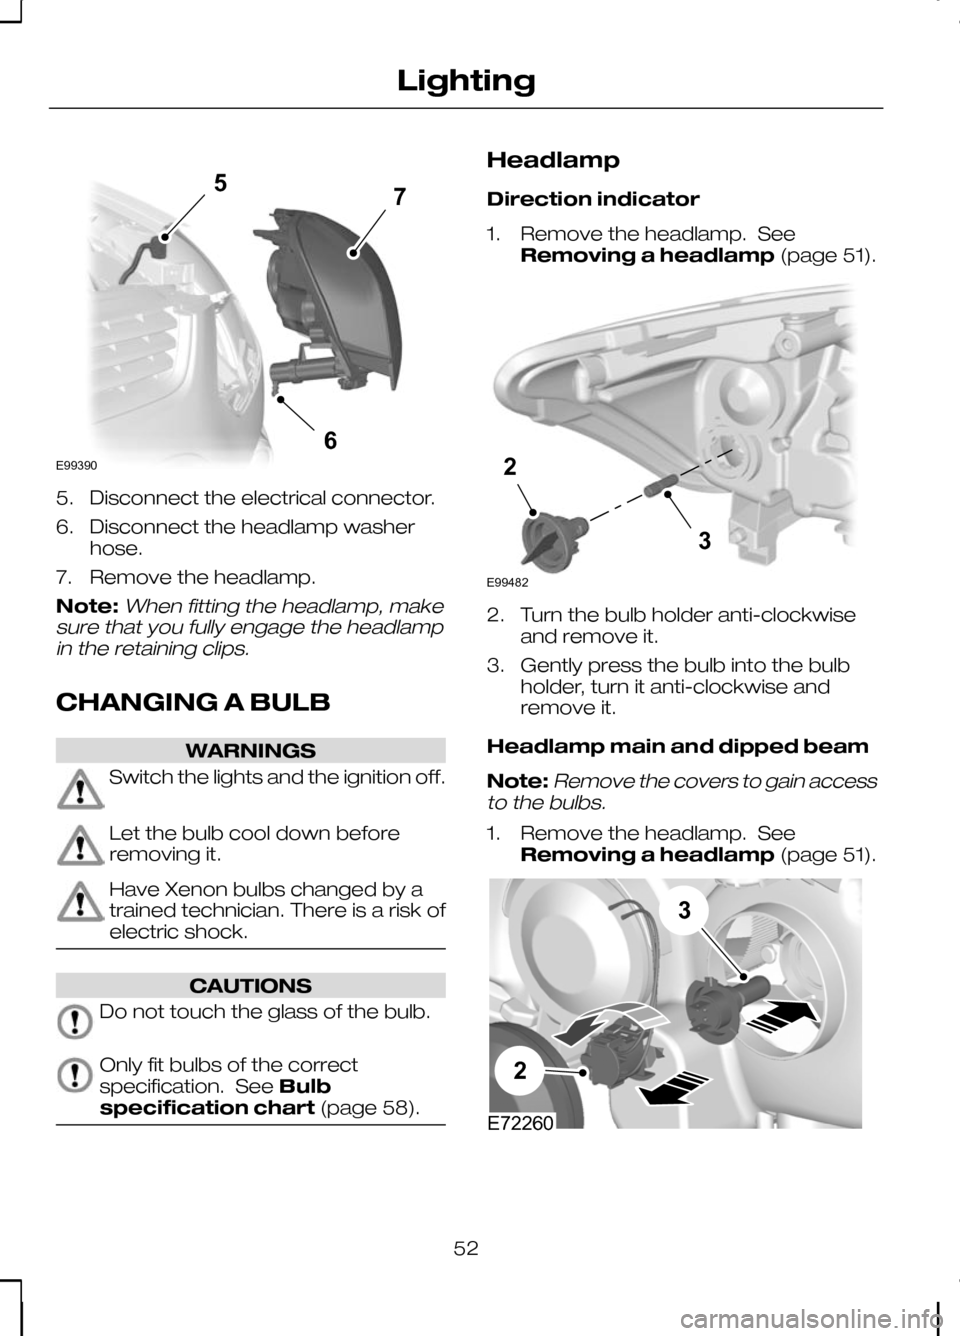 FORD KUGA 2010 1.G Owners Manual 5. Disconnect the electrical connector.
6. Disconnect the headlamp washer
hose.
7. Remove the headlamp.
Note:When fitting the headlamp, make
sure that you fully engage the headlamp in the retaining cl